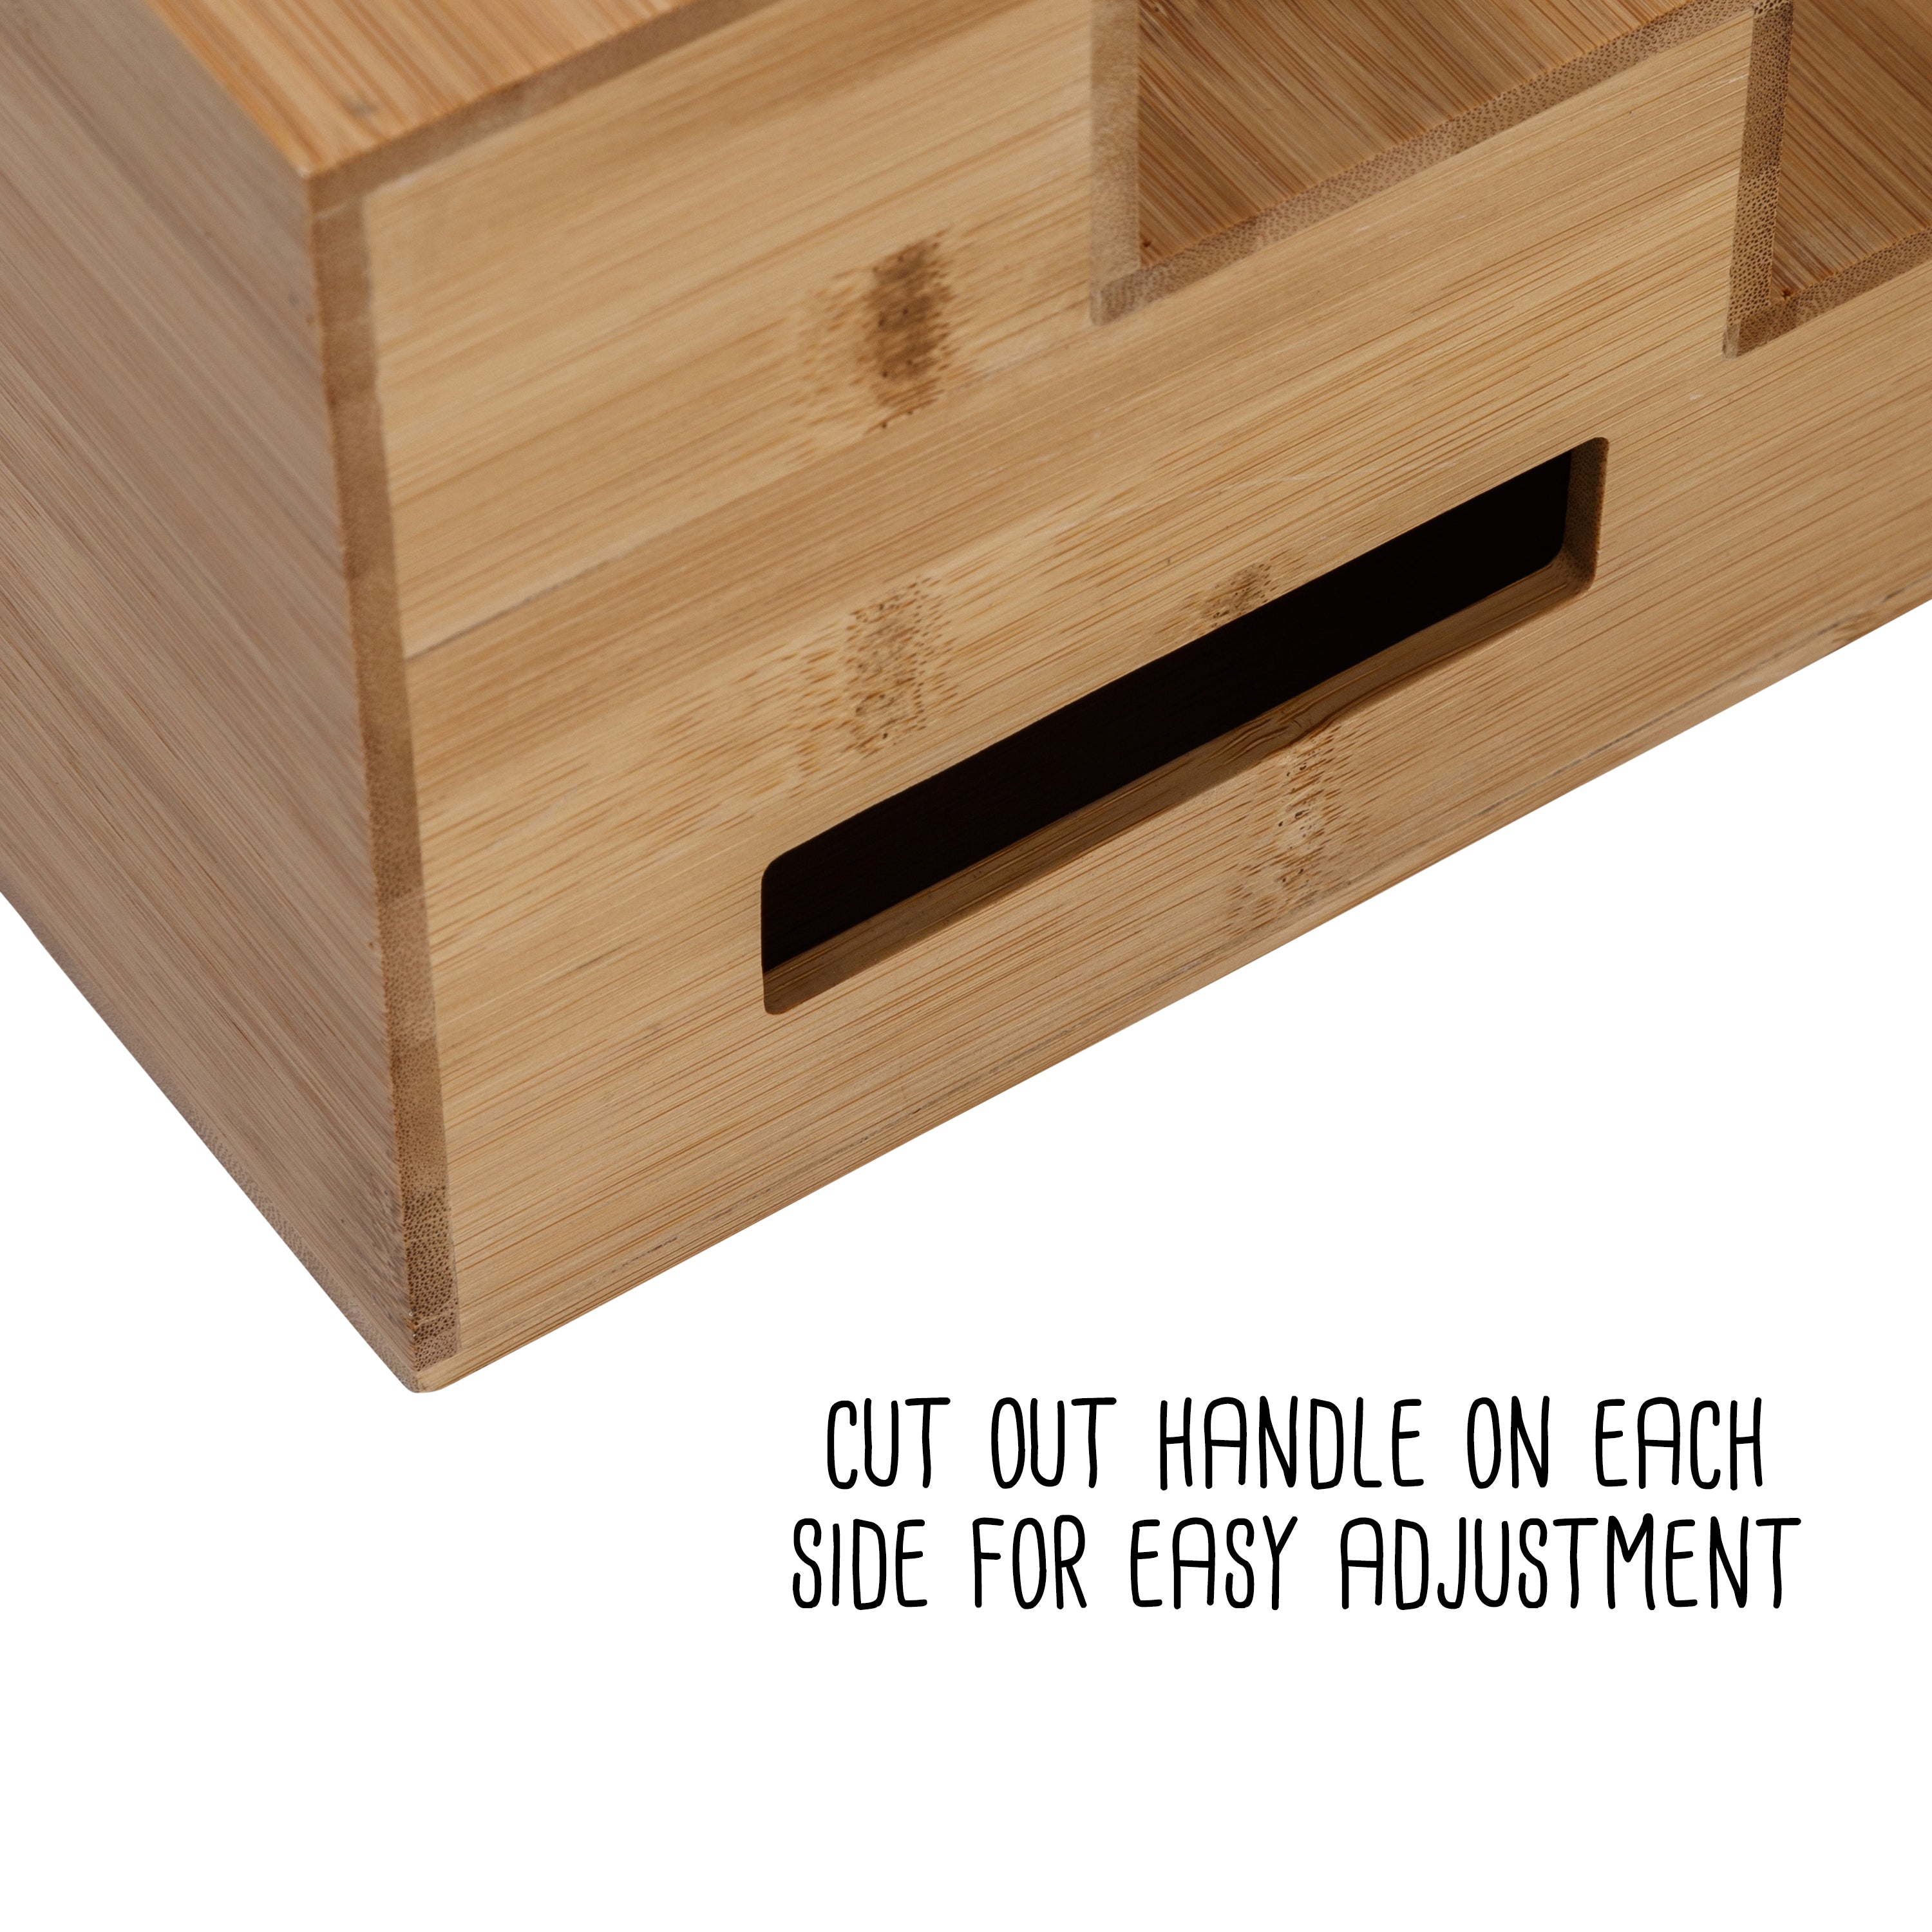 These Bamboo Drawer Dividers Are a Game Changer - & Under $6 Each!